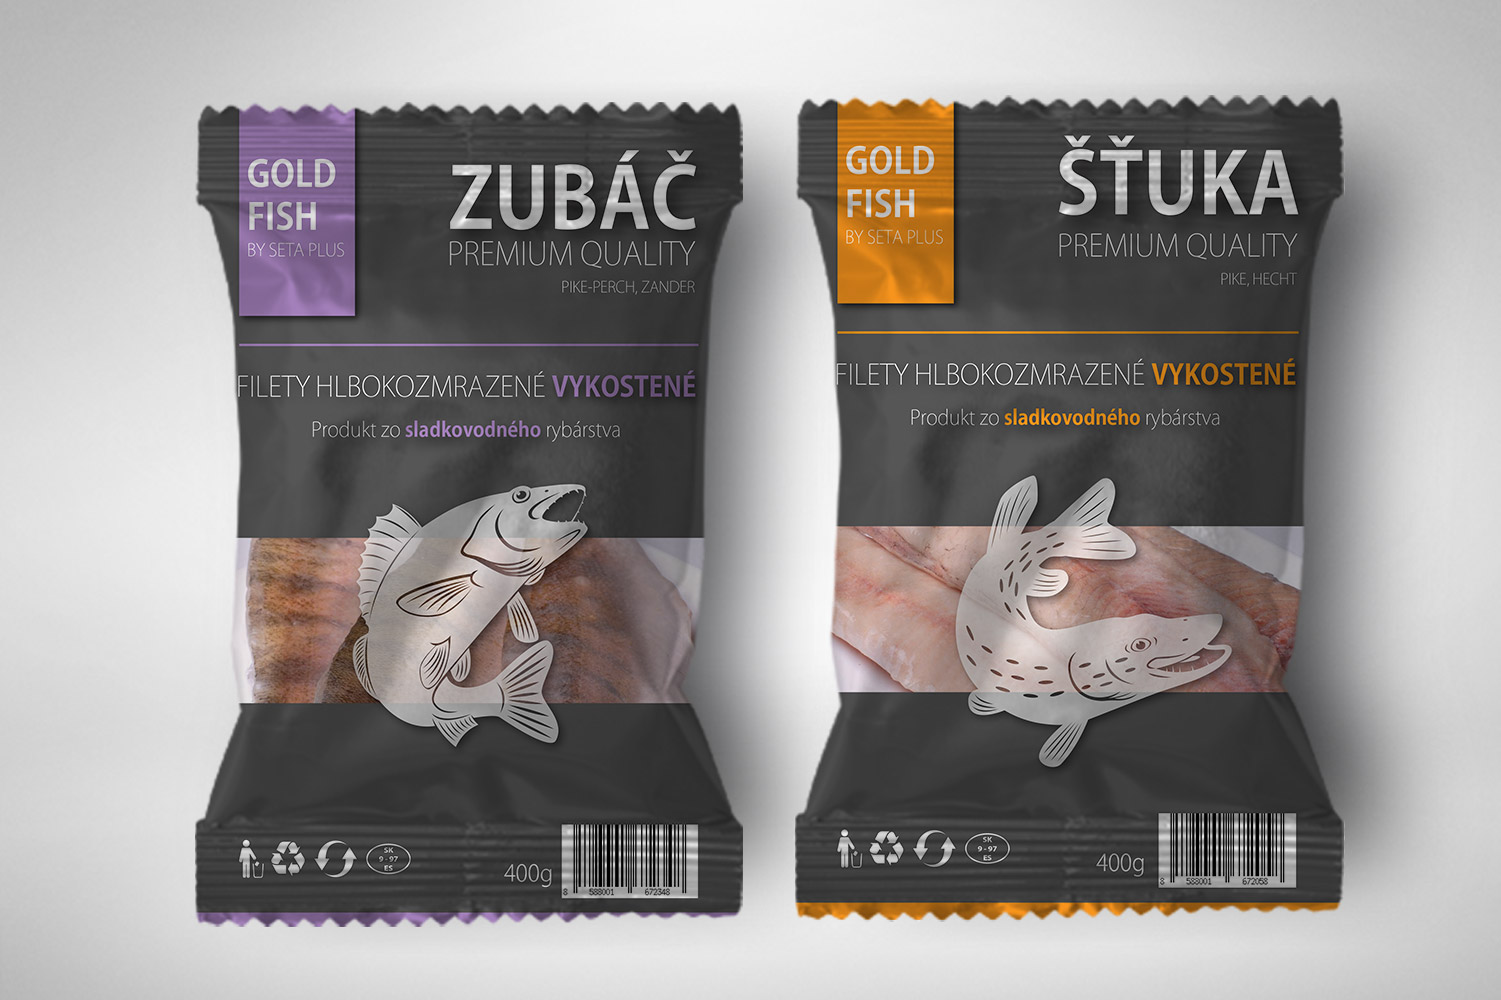 Gold Fish, packaging image